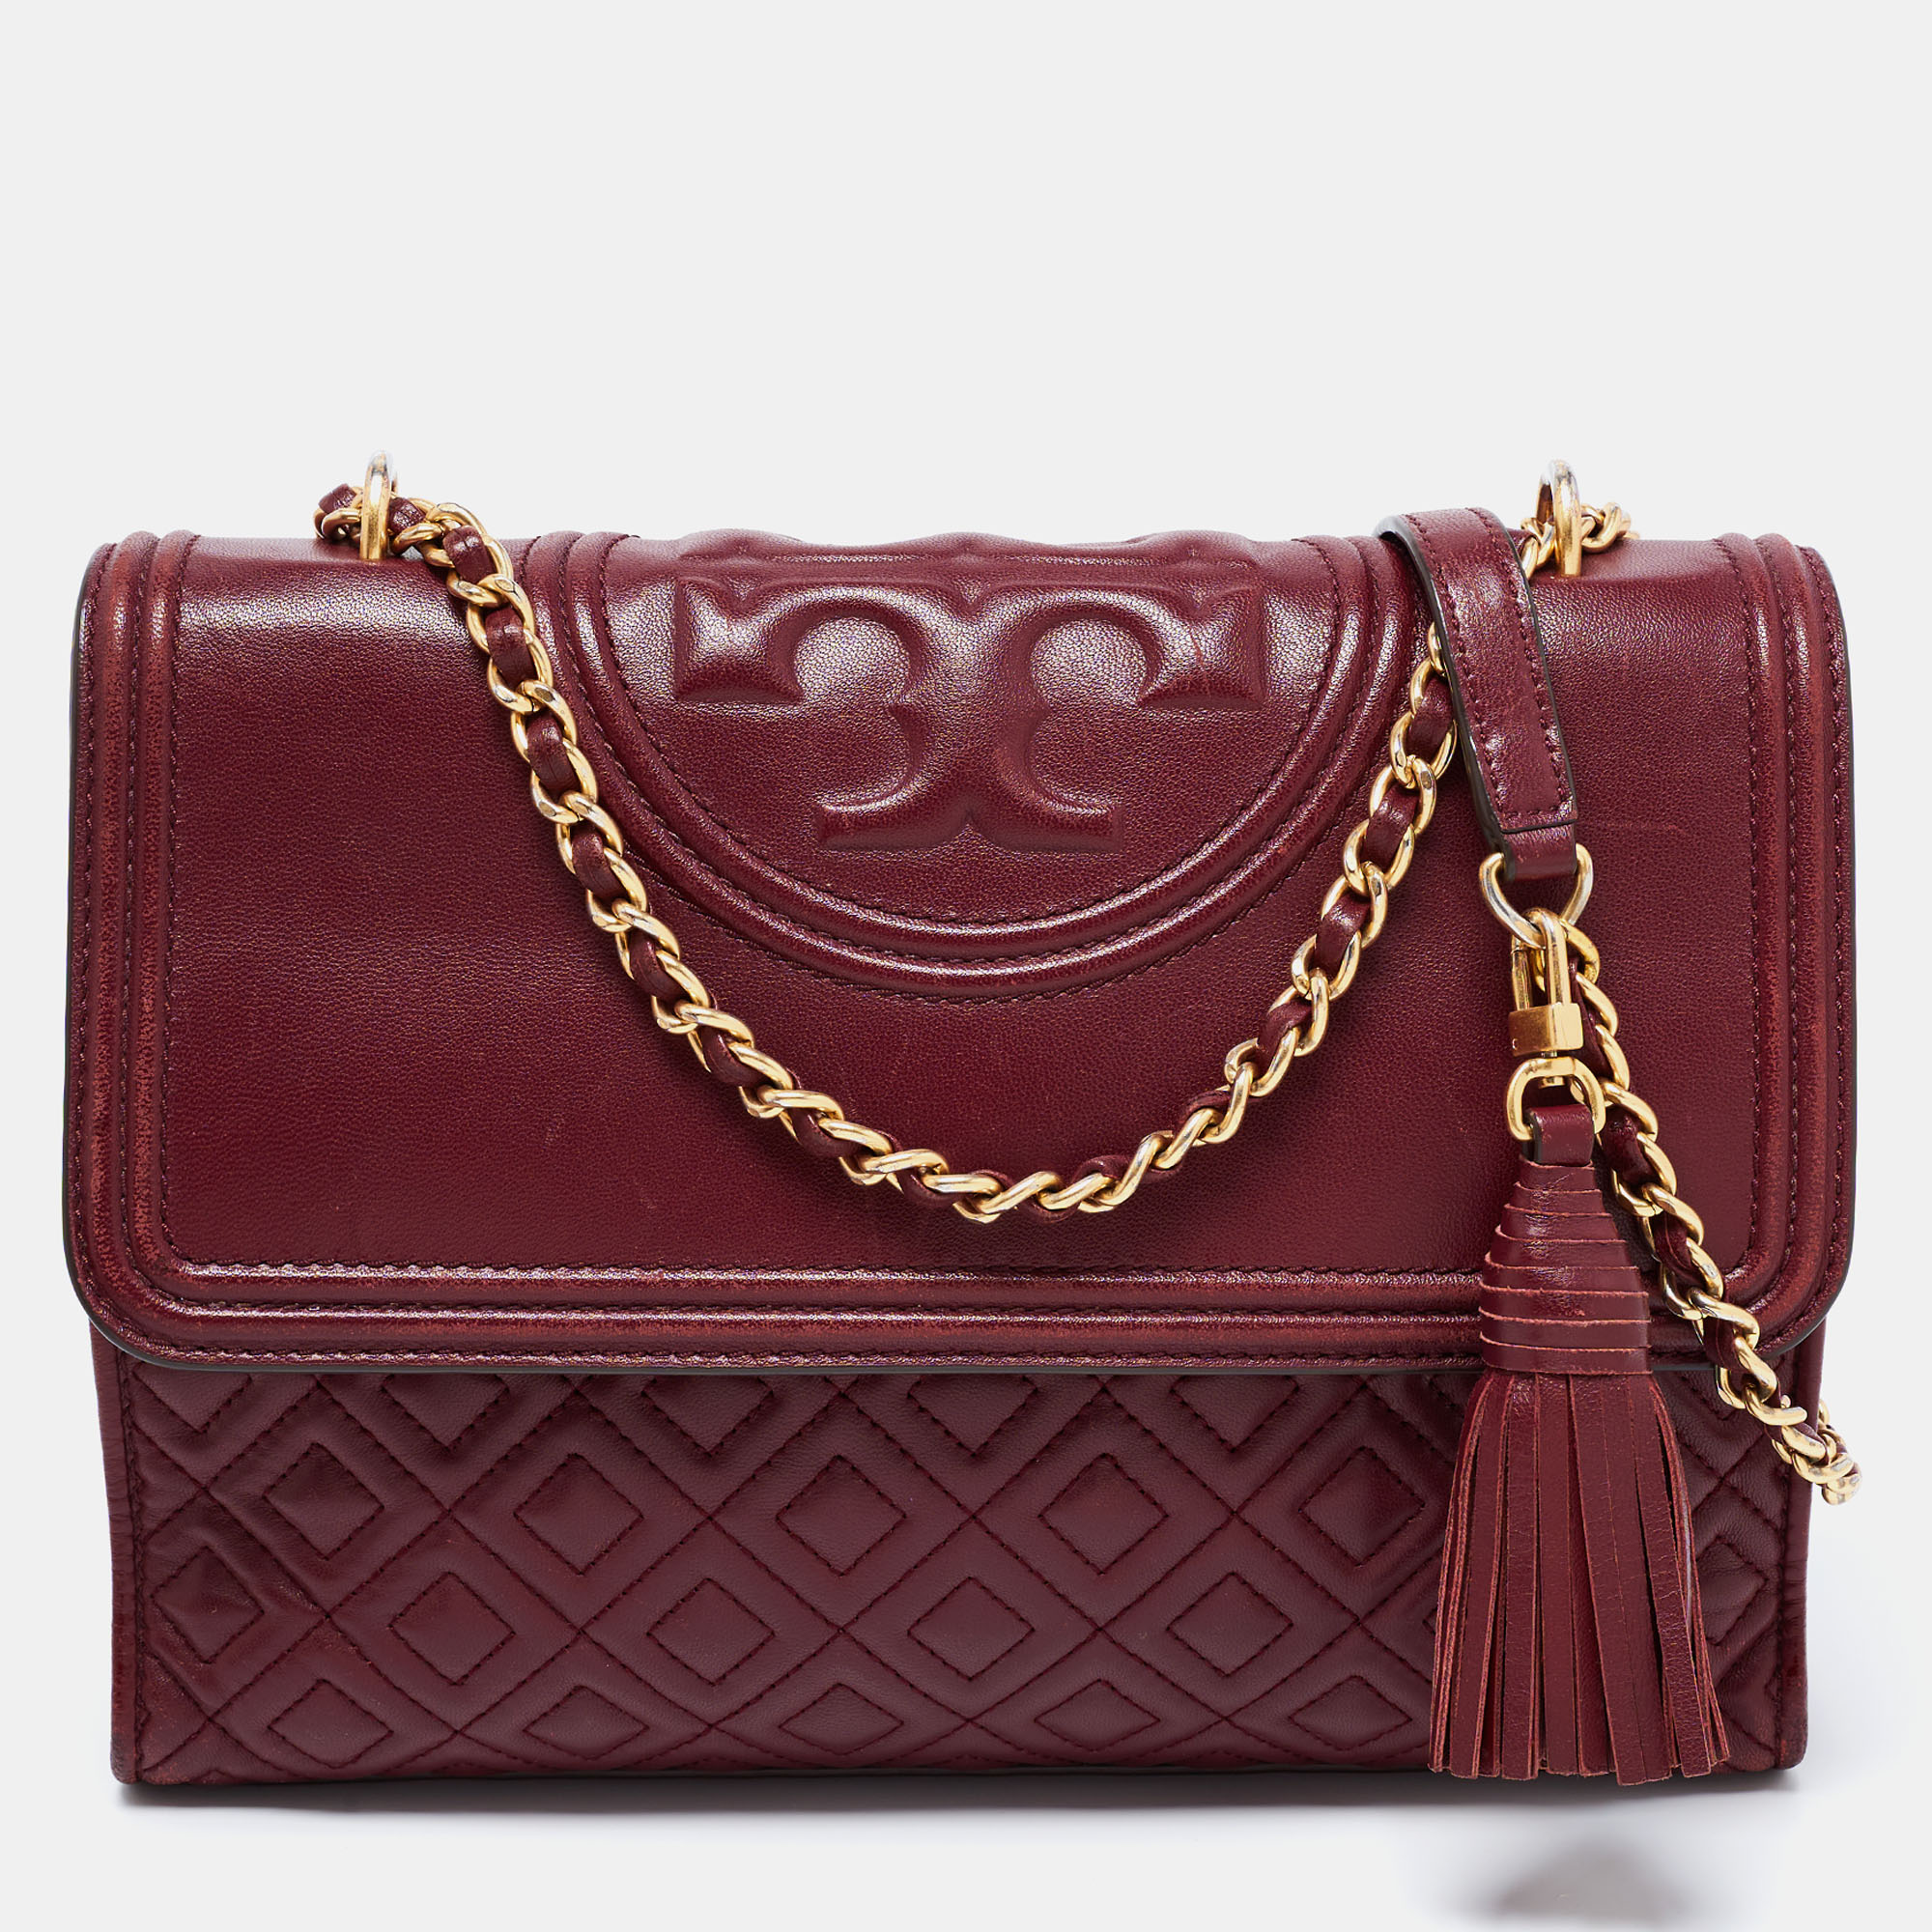 Tory Burch Burgundy Quilted Leather Large Fleming Shoulder Bag